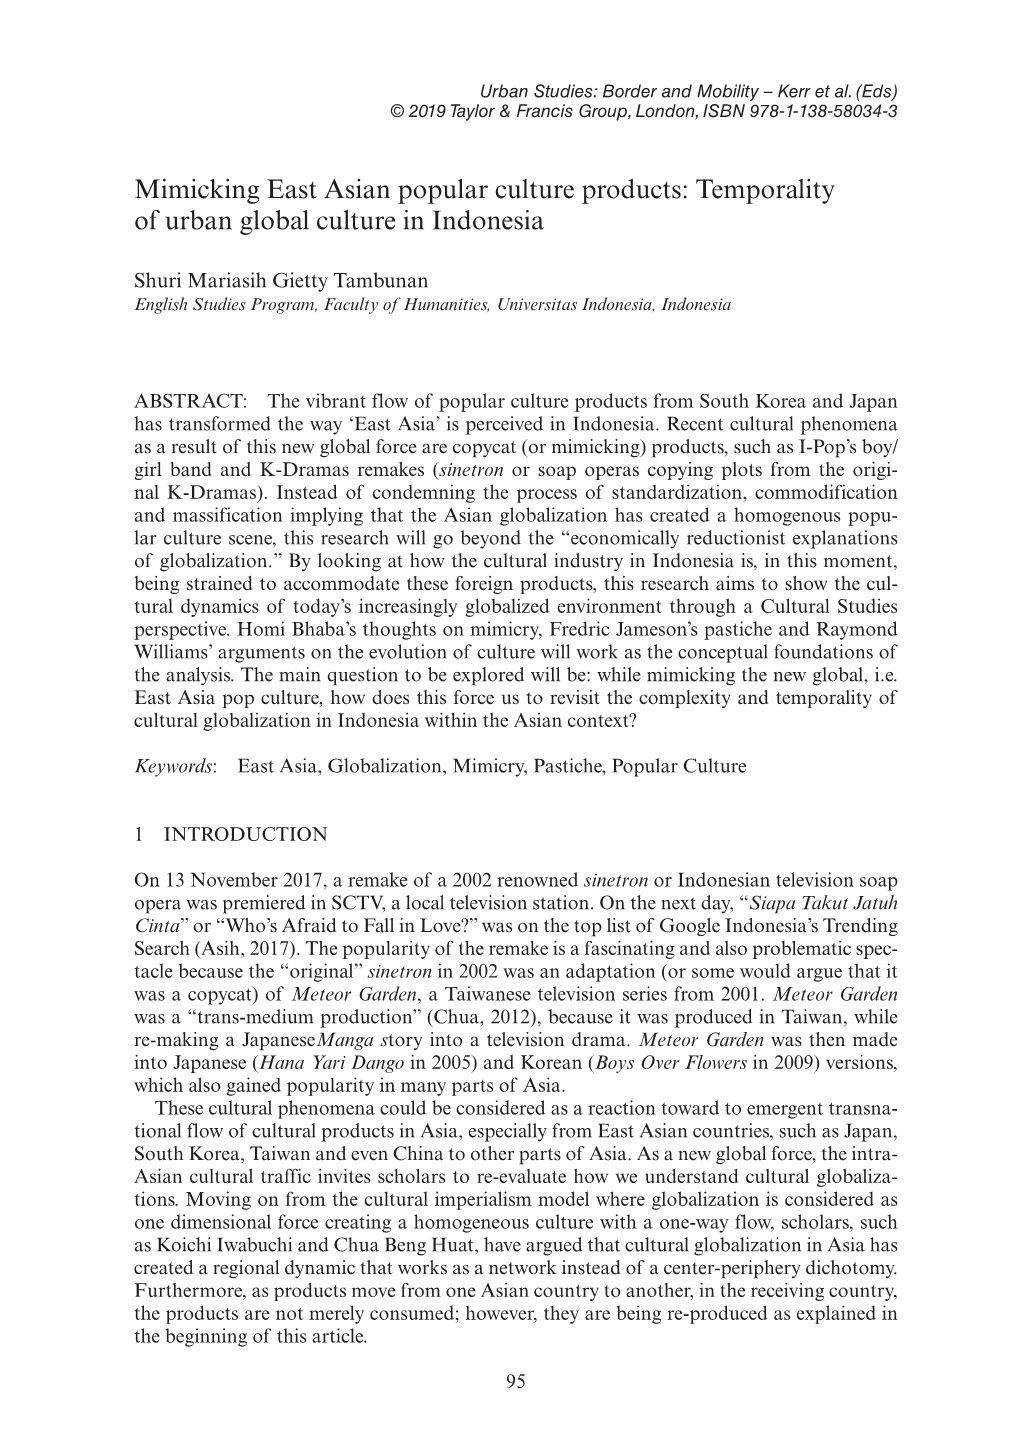 Mimicking East Asian Popular Culture Products: Temporality of Urban Global Culture in Indonesia